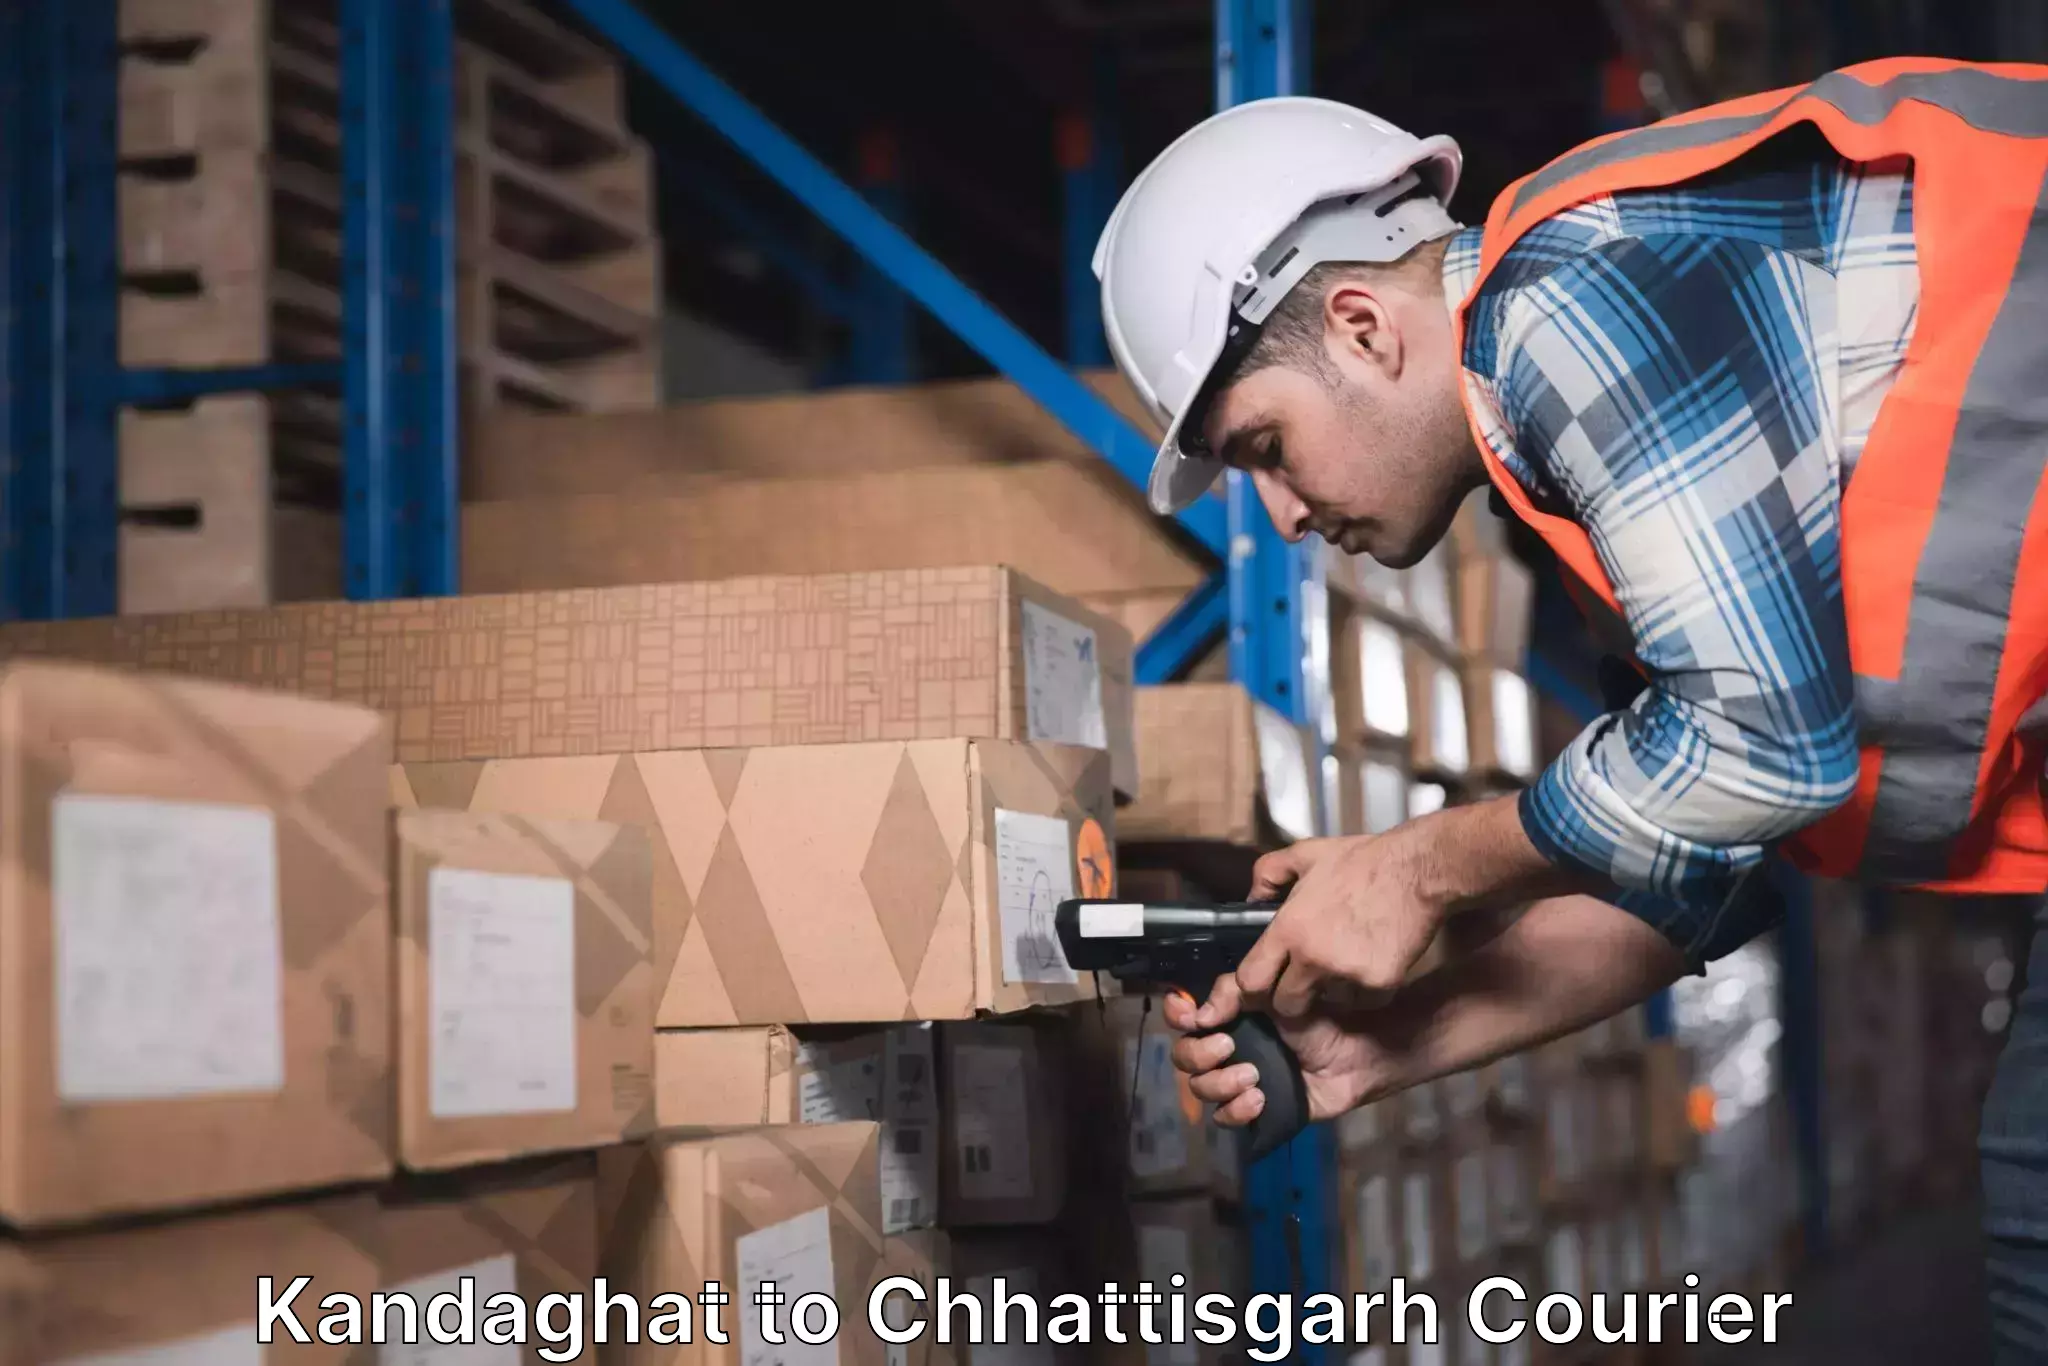 High-priority parcel service Kandaghat to bagbahra